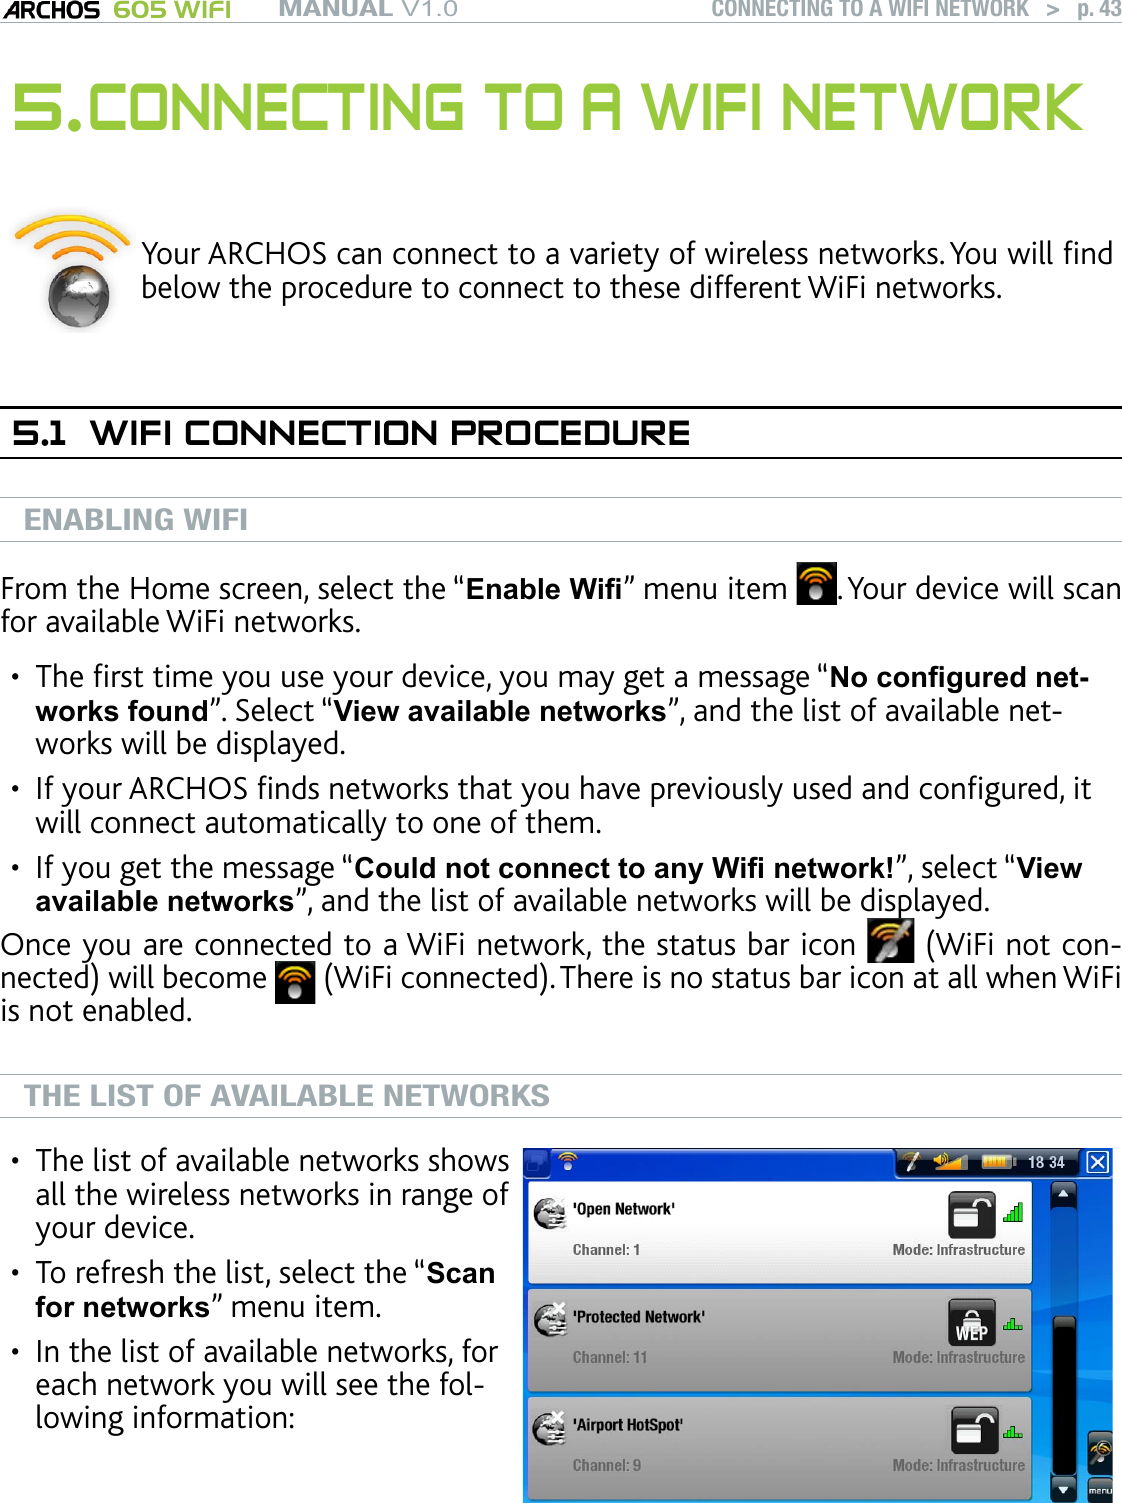 MANUAL V1.0 605 WIFI CONNECTING TO A WIFI NETWORK   &gt;   p. 435. CONNECTING TO A WIFI NETWORKYour ARCHOS can connect to a variety of wireless networks. You will nd below the procedure to connect to these different WiFi networks.5.1  WIFI CONNECTION PROCEDUREENABLING WIFIFrom the Home screen, select the “Enable Wi” menu item  . Your device will scan for available WiFi networks.The rst time you use your device, you may get a message “No congured net-works found”. Select “View available networks”, and the list of available net-works will be displayed.If your ARCHOS nds networks that you have previously used and congured, it will connect automatically to one of them.If you get the message “Could not connect to any Wi network!”, select “View available networks”, and the list of available networks will be displayed.Once you are connected to a WiFi network, the status bar icon   (WiFi not con-nected) will become   (WiFi connected). There is no status bar icon at all when WiFi is not enabled.THE LIST OF AVAILABLE NETWORKSThe list of available networks shows all the wireless networks in range of your device.To refresh the list, select the “Scan for networks” menu item.In the list of available networks, for each network you will see the fol-lowing information:••••••